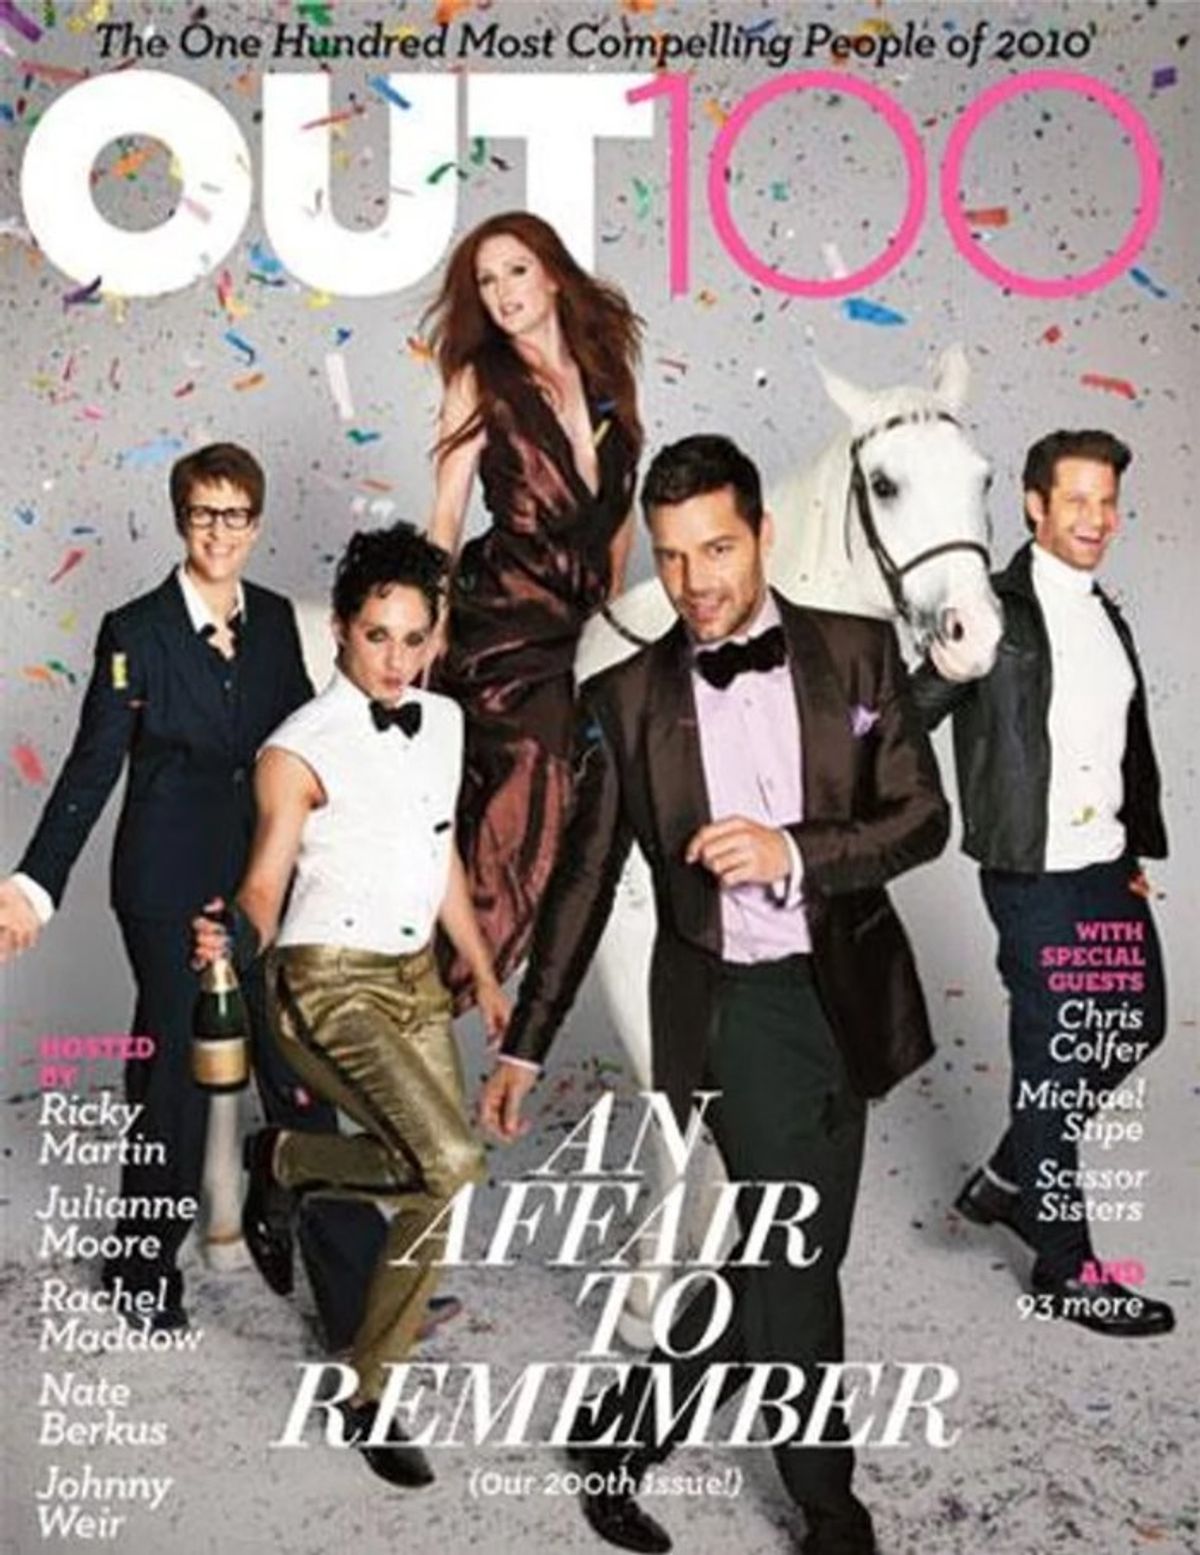 2010 Out100 Cover: Ricky Martin, Julianne Moore, Rachel Maddow, Nate Berkus, Johnny Weir